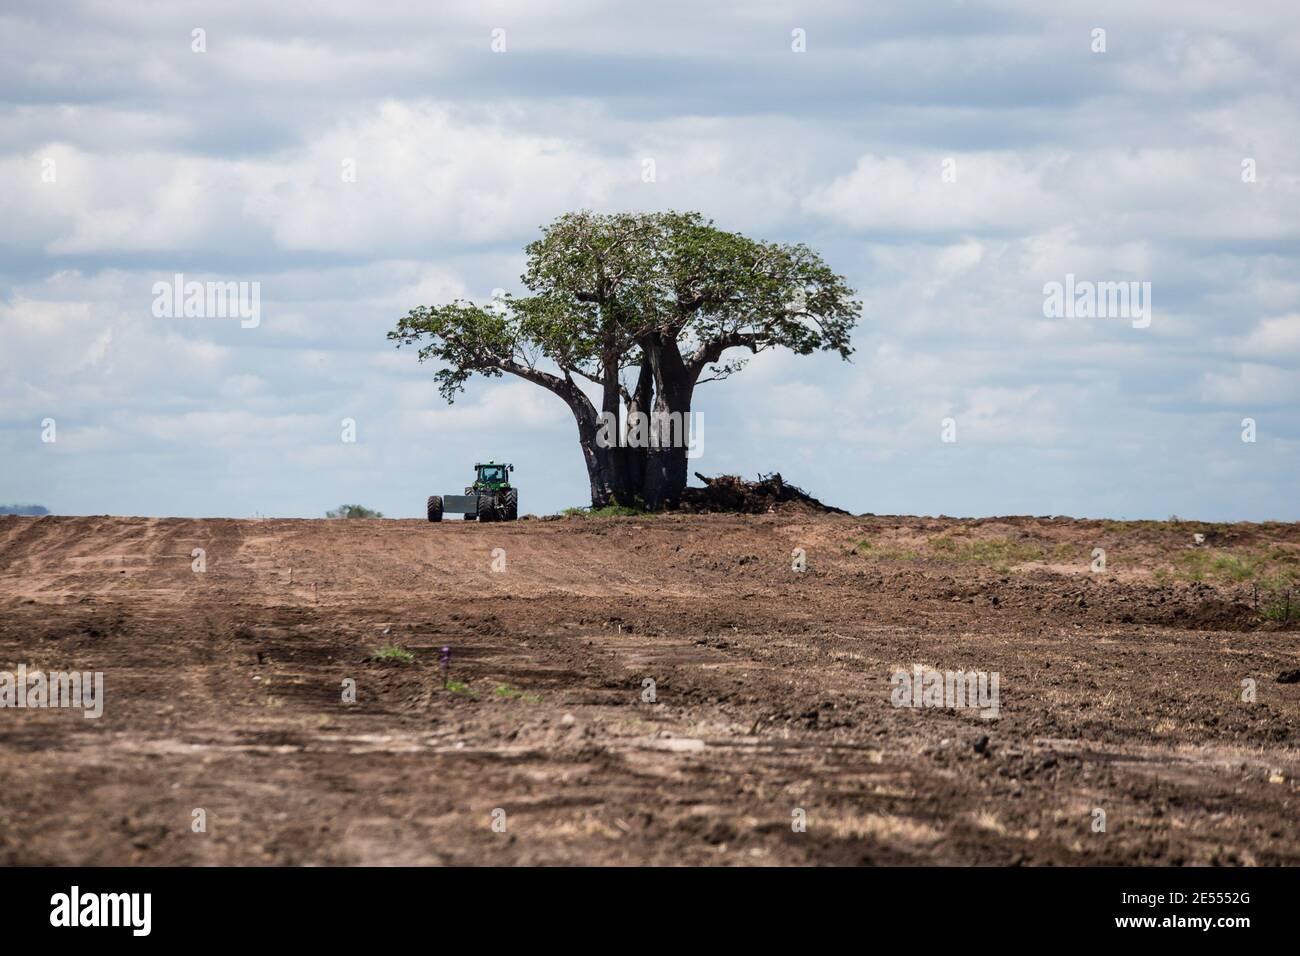 A Baobab Tree stands alone in an area cleared of forest and overgrowth with a tractor parked next to it showing the incredible magnitude of the indigenous tree at  Saadani National Park. Saadani National Park is Tanzania's 13th National Park. It has an area of 1062 km2 and was officially gazetted in 2005, from a game reserve which had existed from 1969. It is the only wildlife sanctuary in Tanzania bordering the sea. Stock Photo